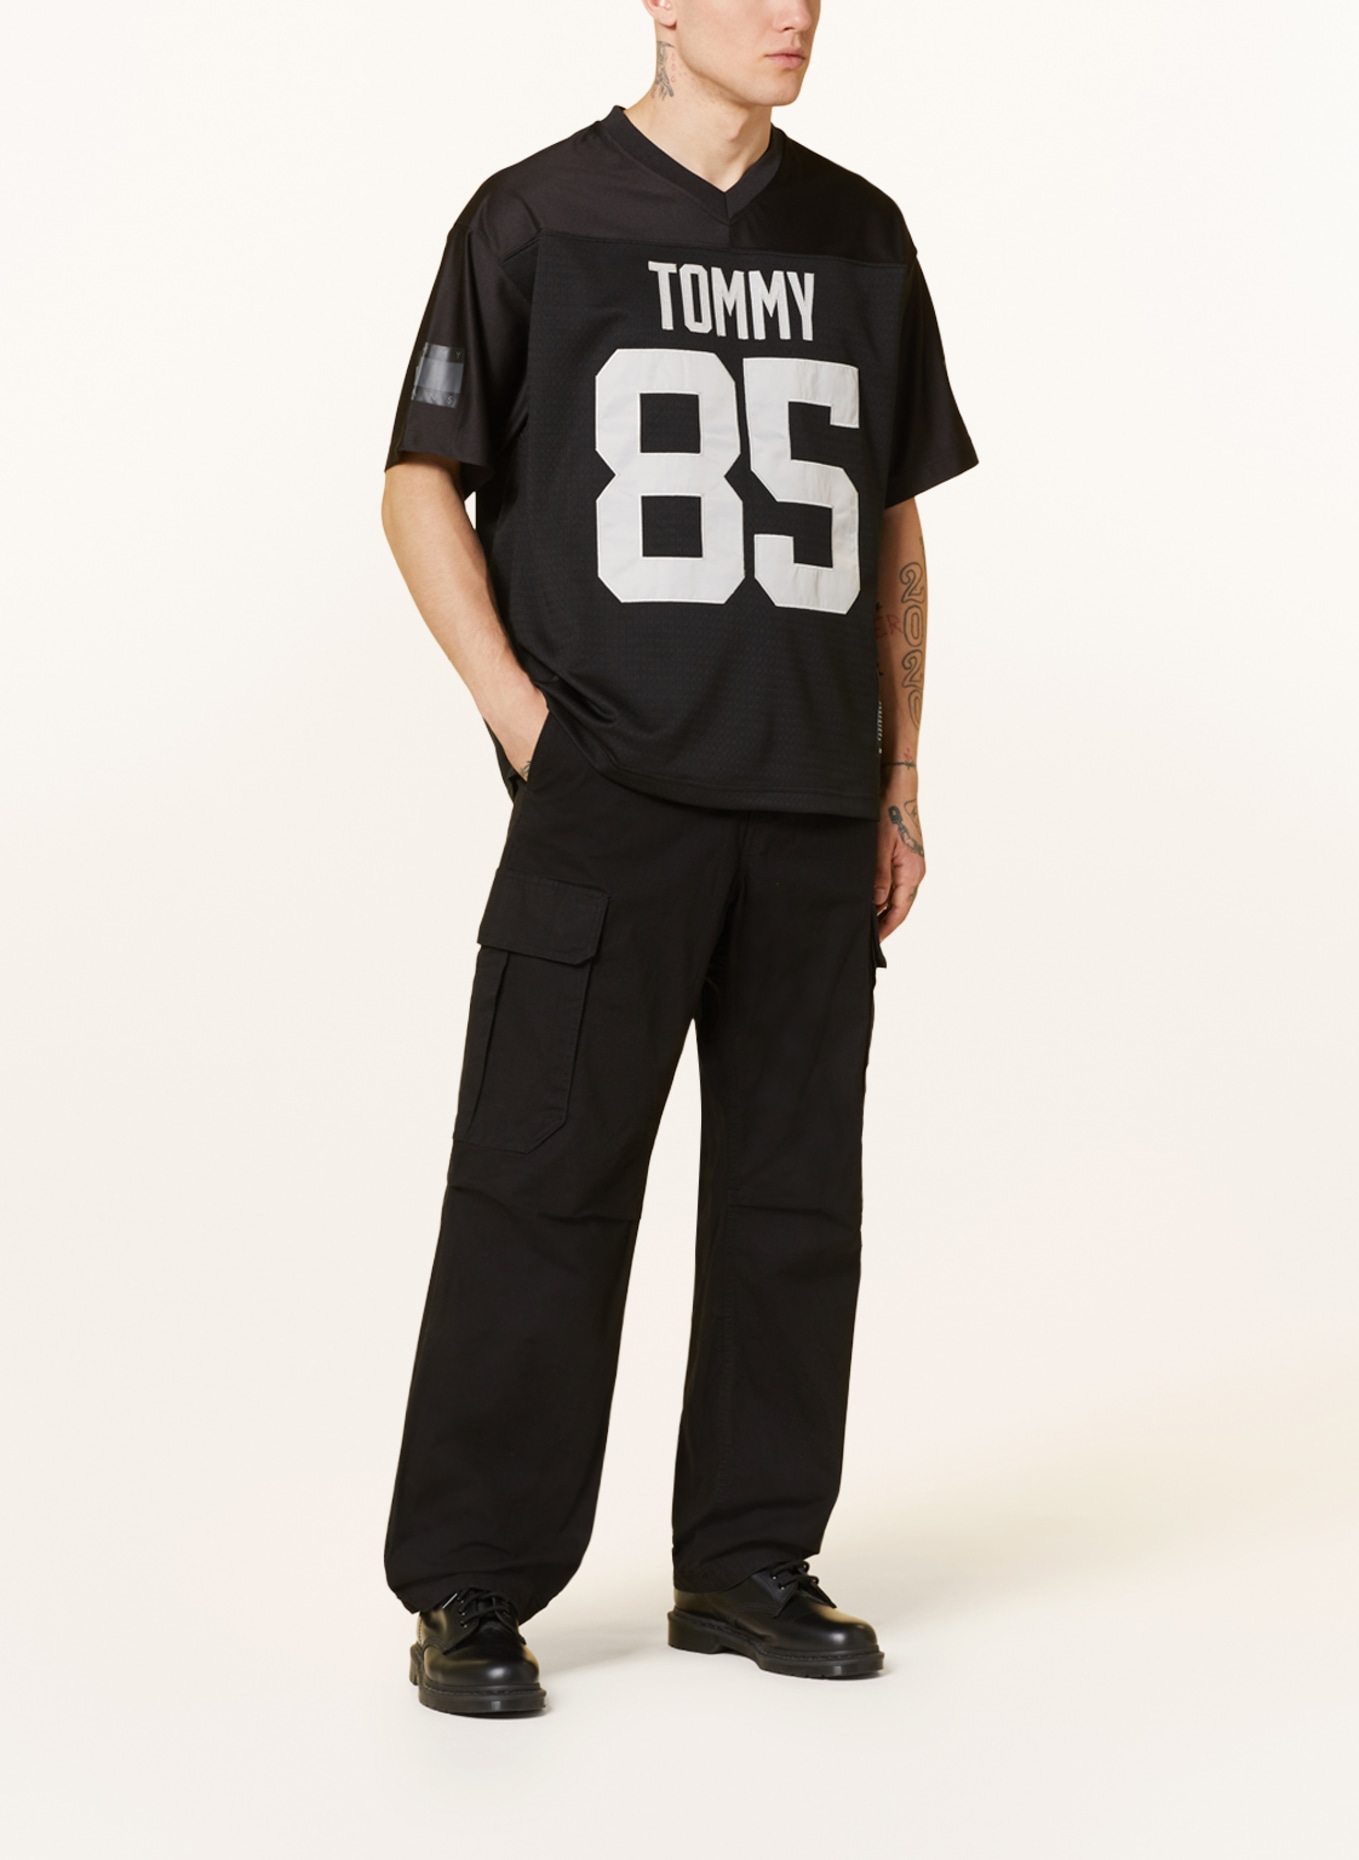 TOMMY JEANS T-shirt made of mesh in black/ gray